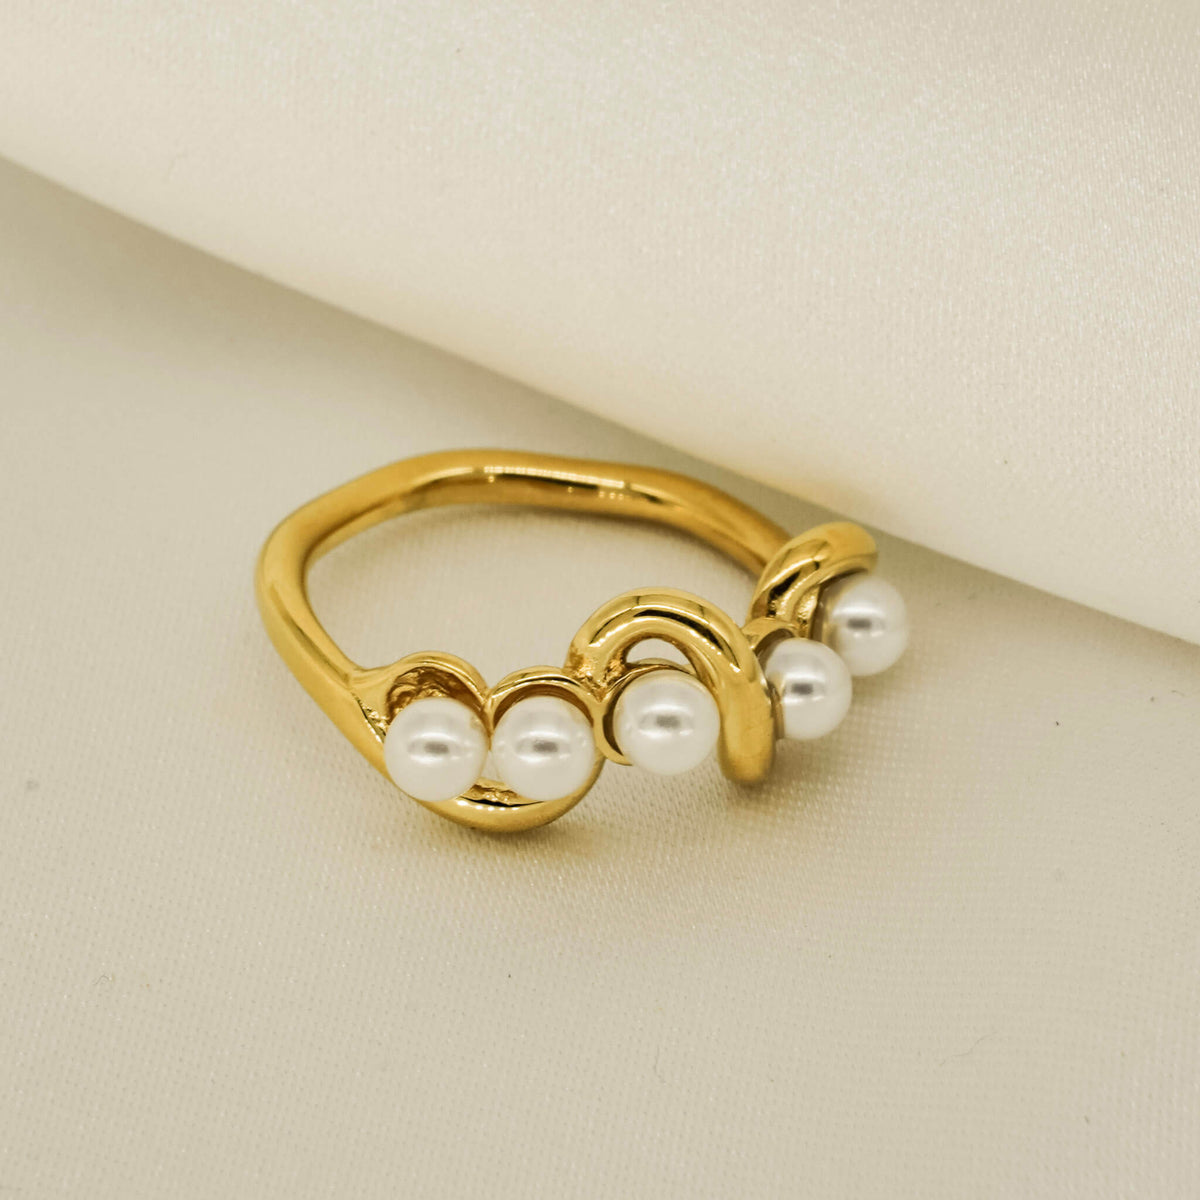 pearl ring made of stainless steel. Embedded in the band are 5 elegant pearls. The ring costs €32.95 and it is an excellent gift for under €35.